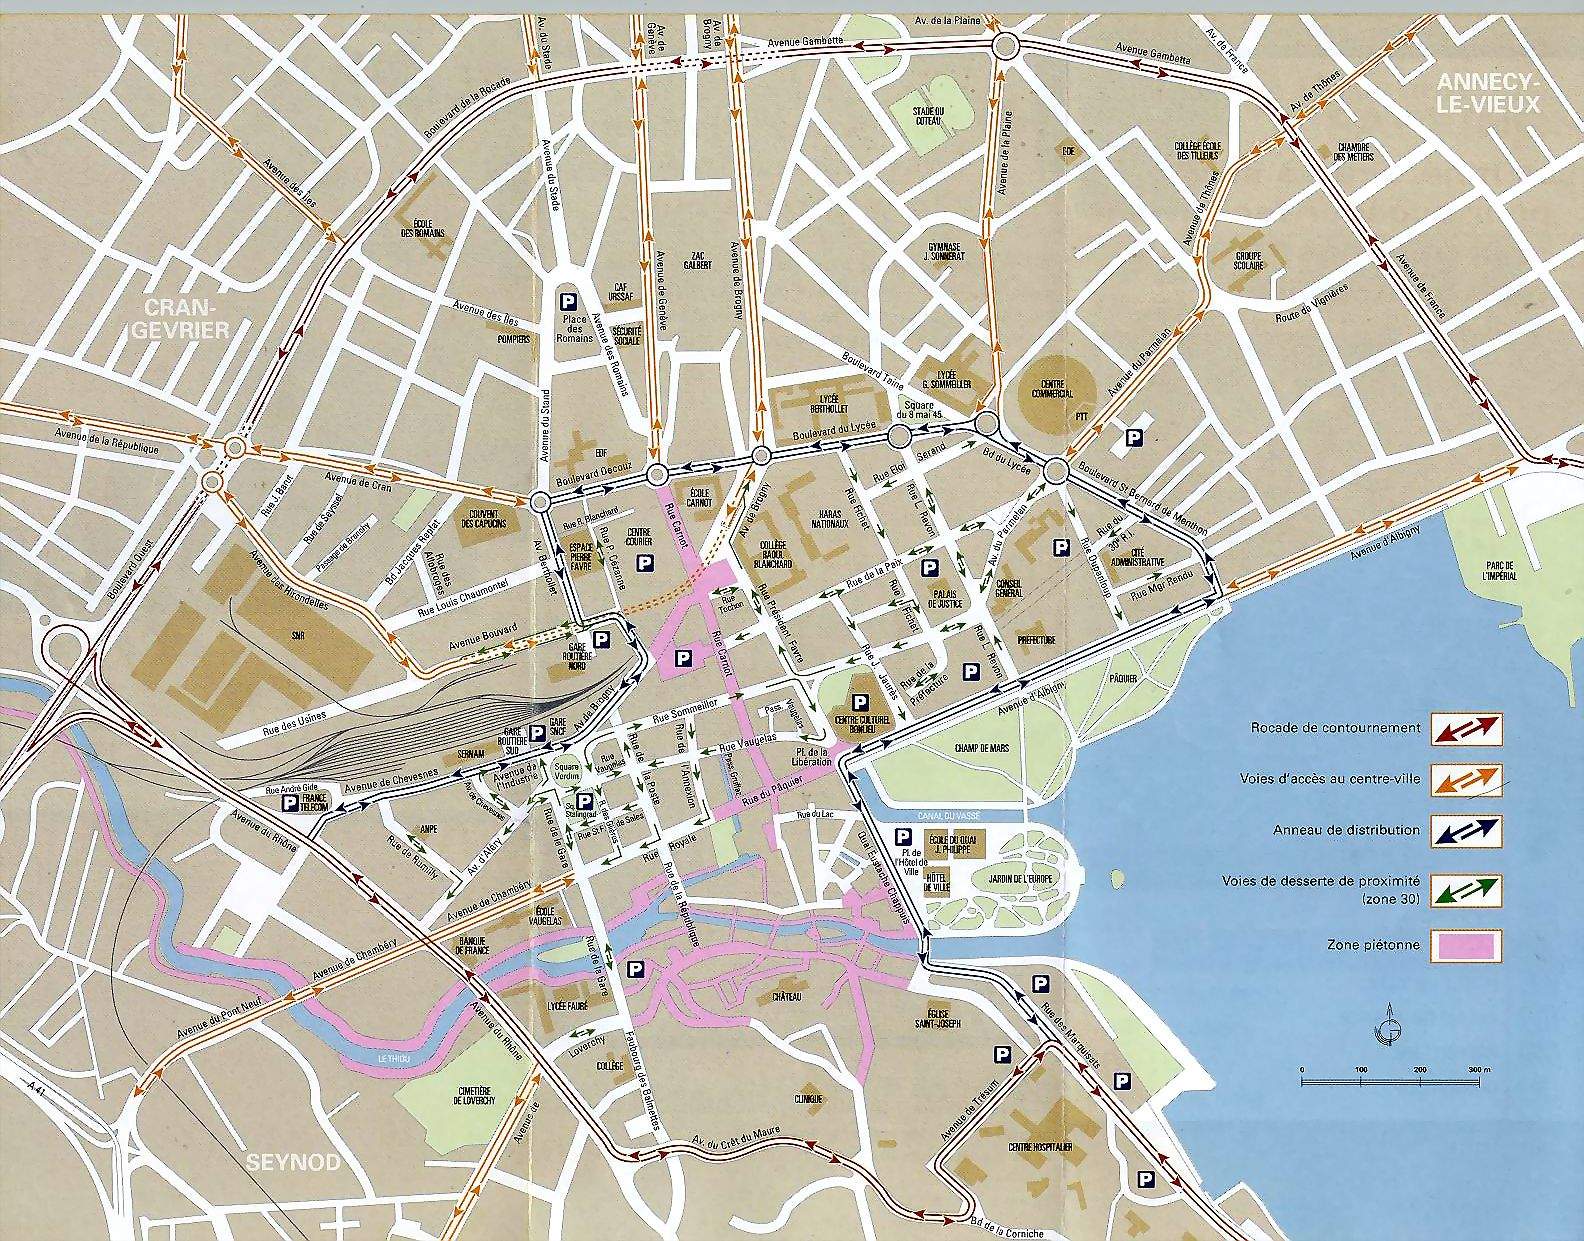 Annecy downtown map